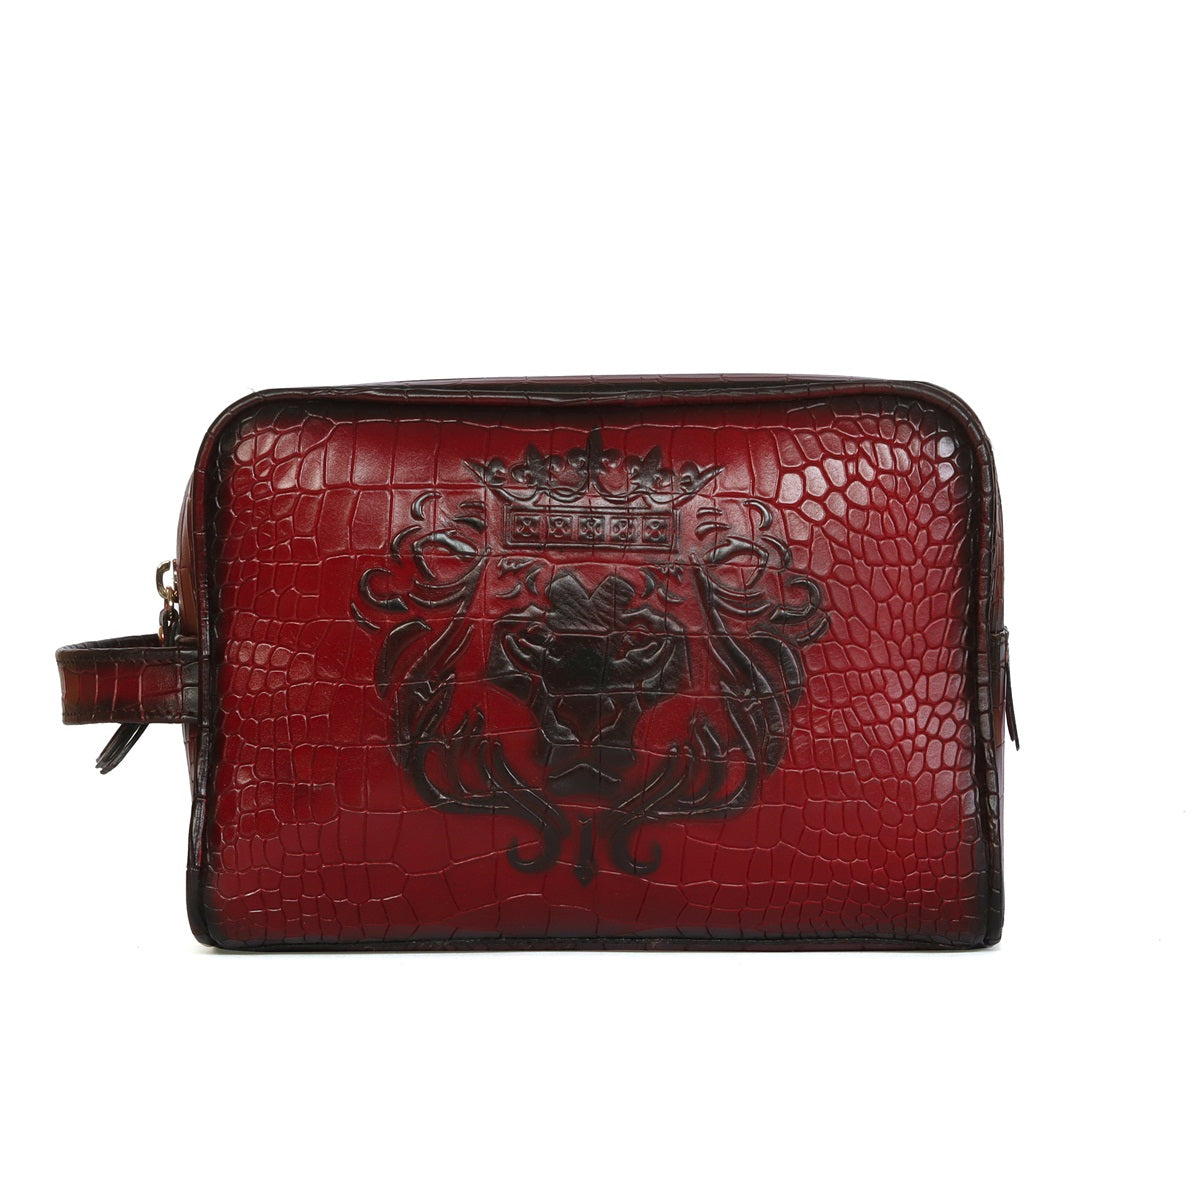 Wine Deep Cut Leather Toiletry / Travel Bag